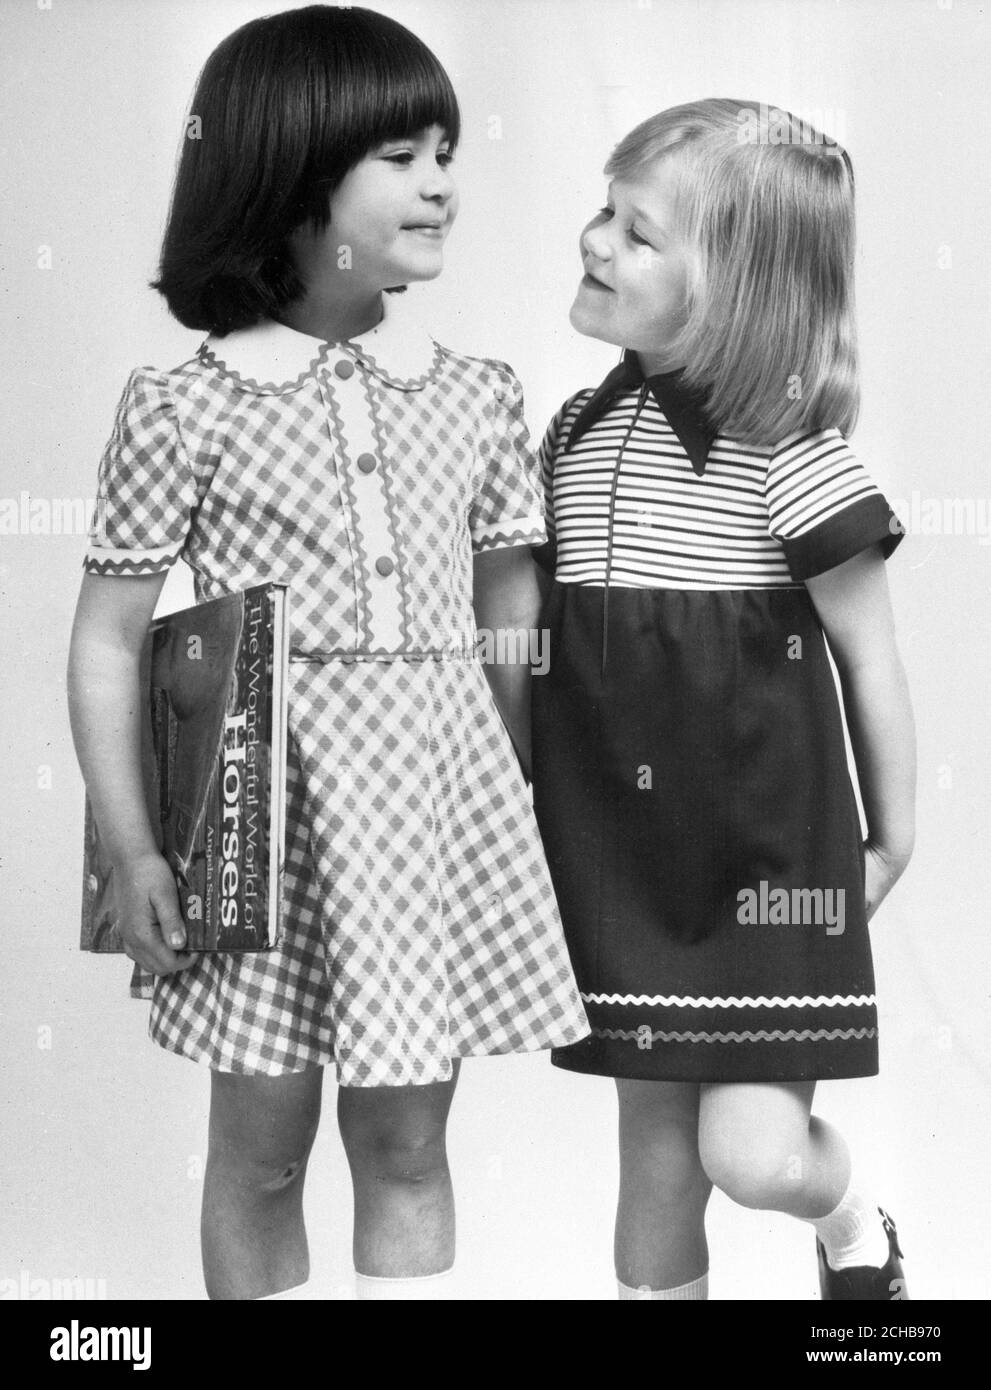 School dresses from a collection at British Home Stores. Stock Photo